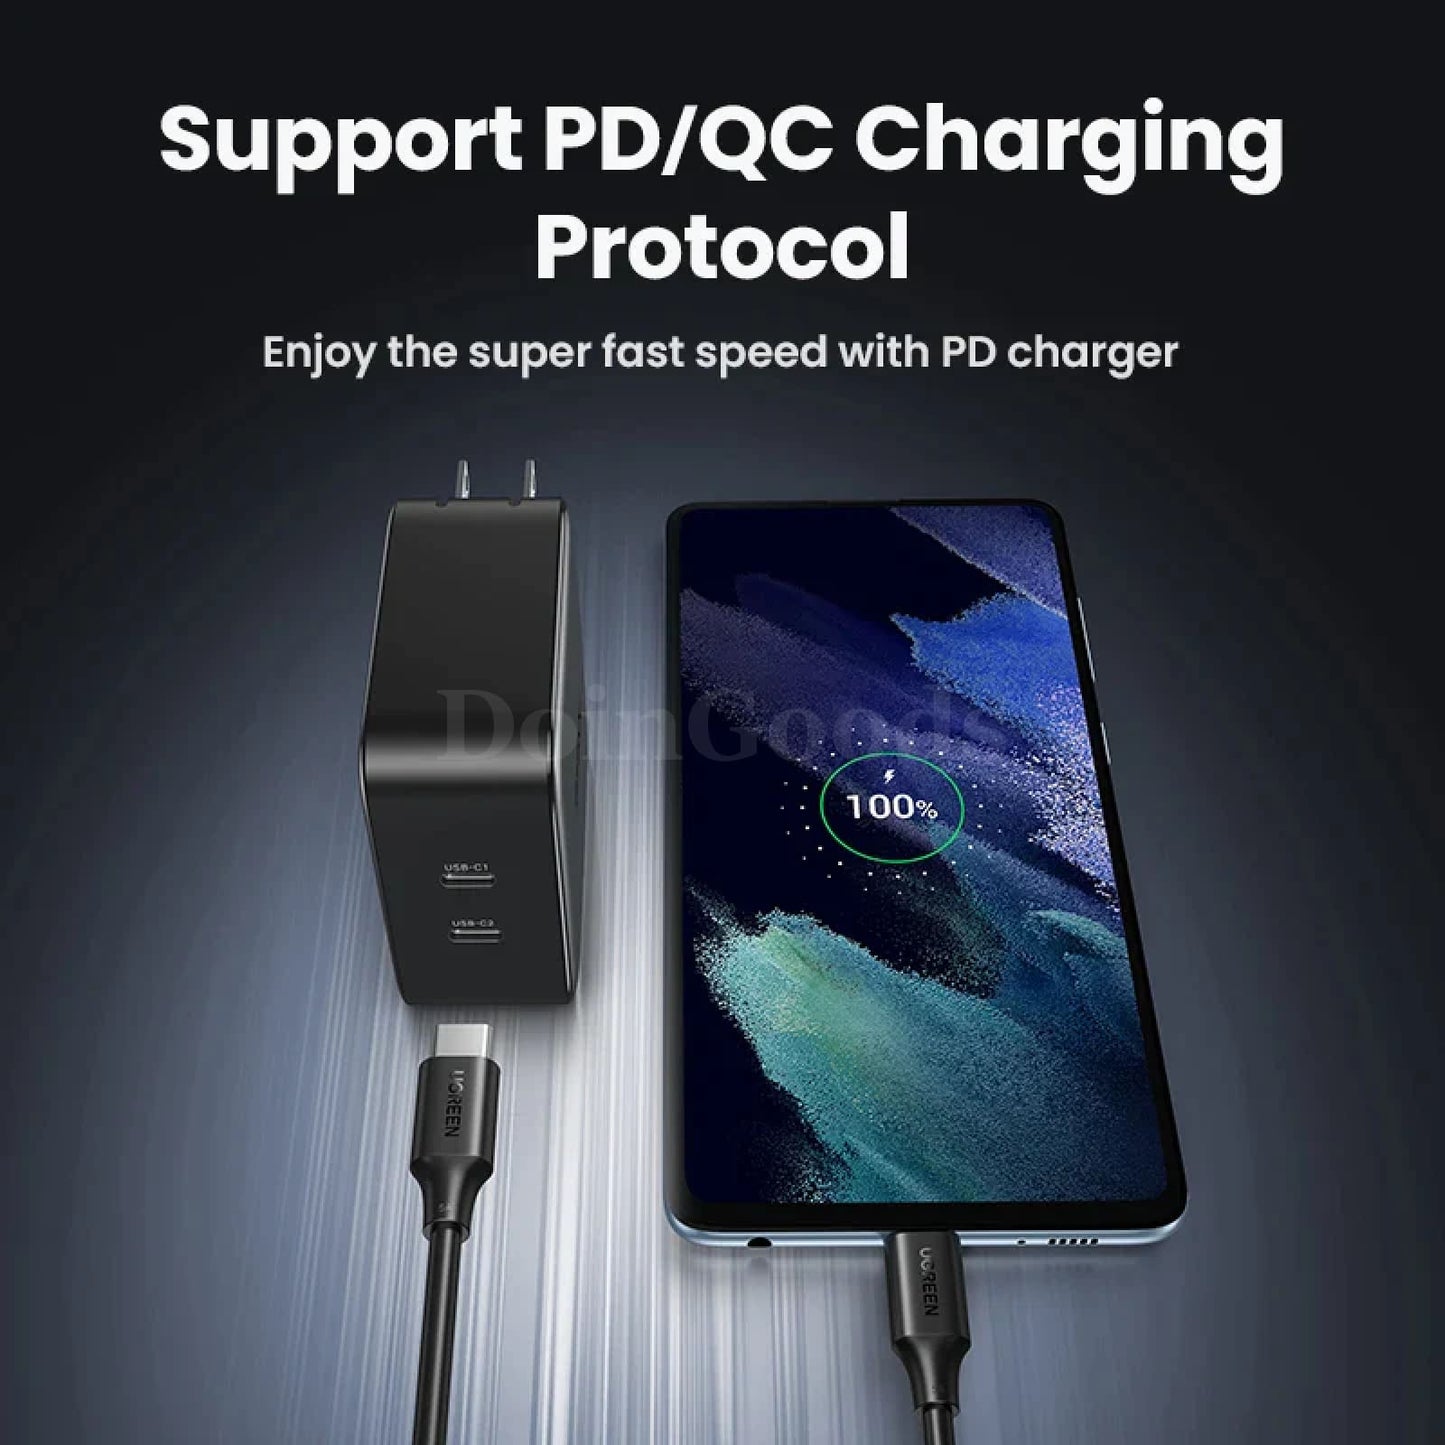 Ugreen 100W Usb C To Cable 5A Fast Charge For Iphone 15 Macbook Ipad Pro 301635